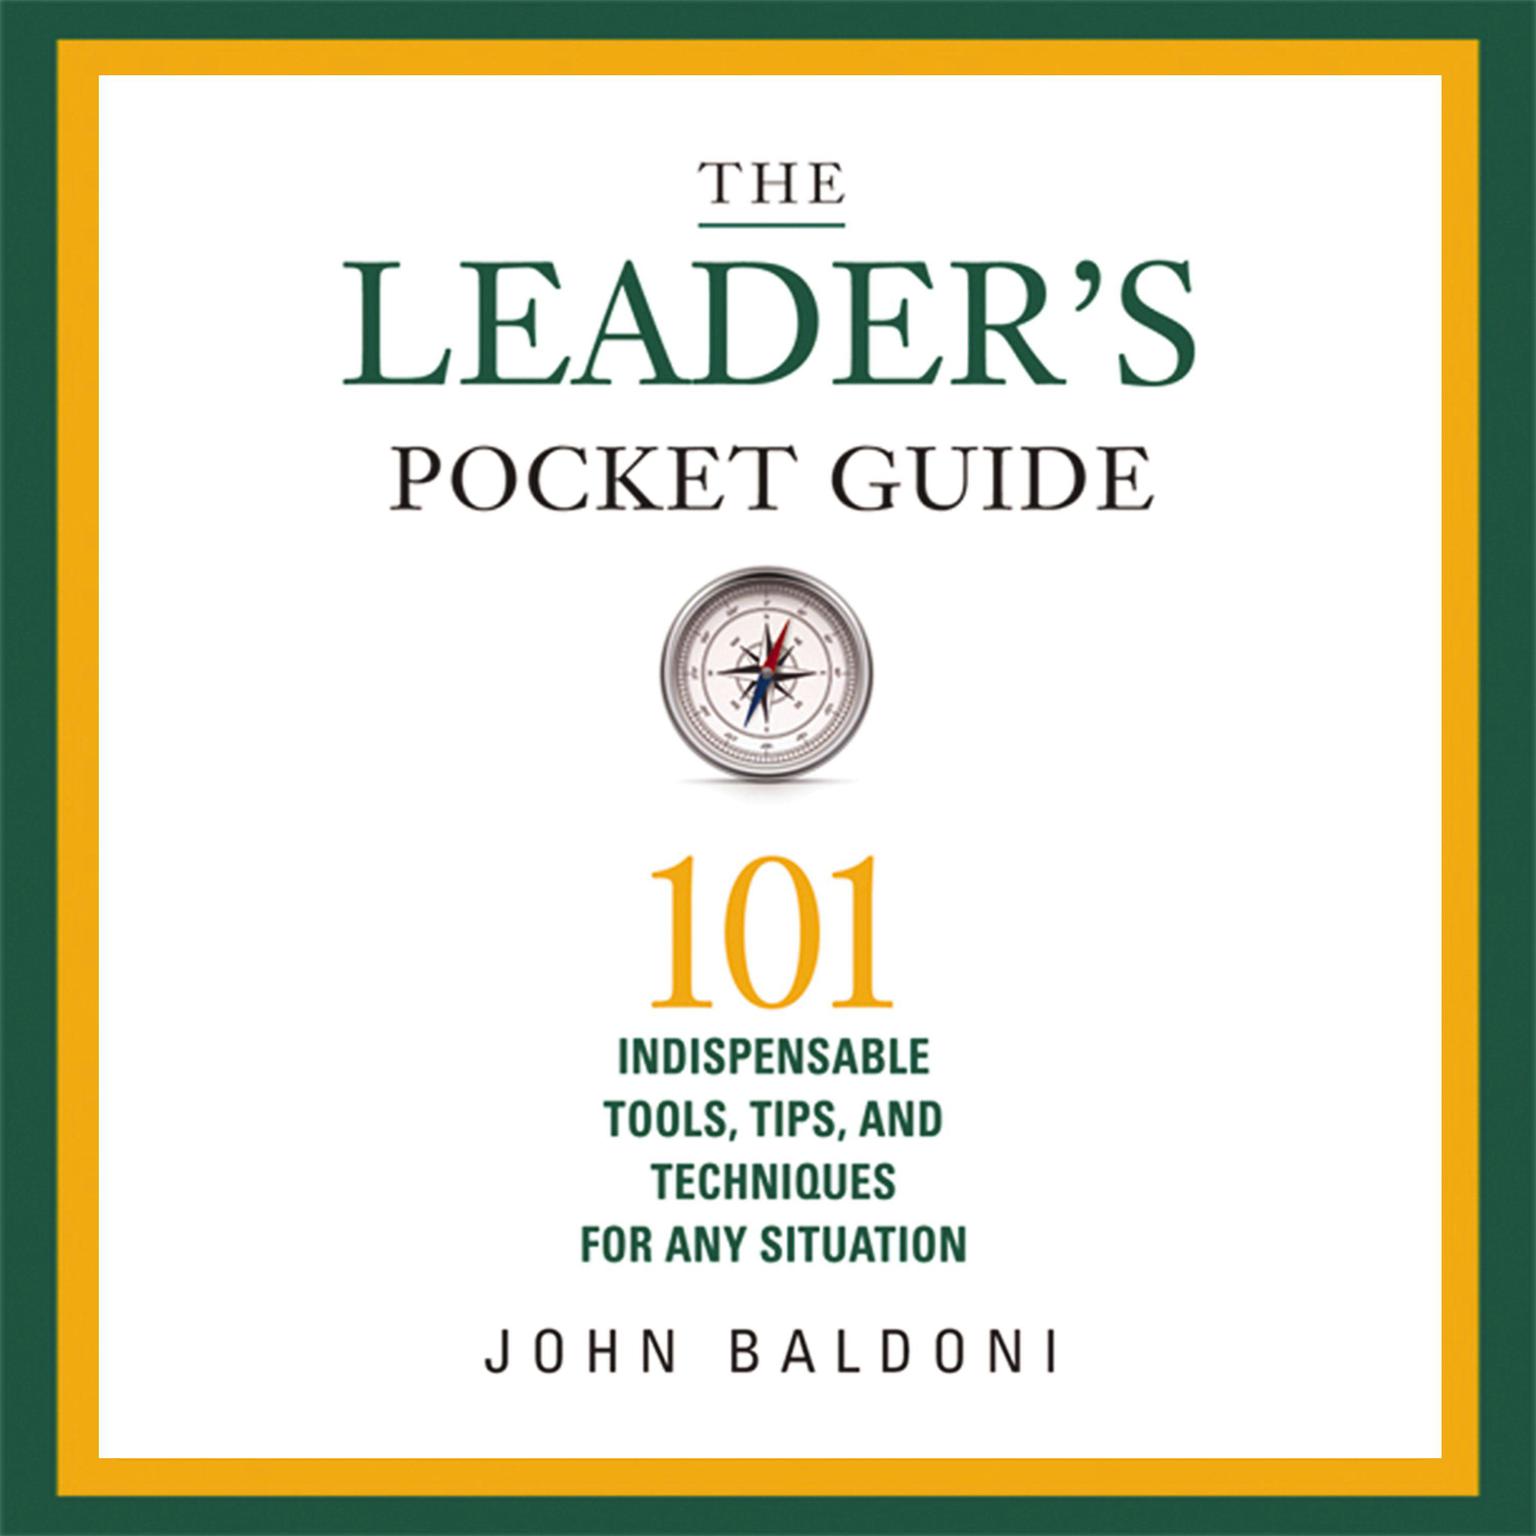 The Leaders Pocket Guide: 101 Indispensable Tools, Tips, and Techniques for Any Situation Audiobook, by John Baldoni